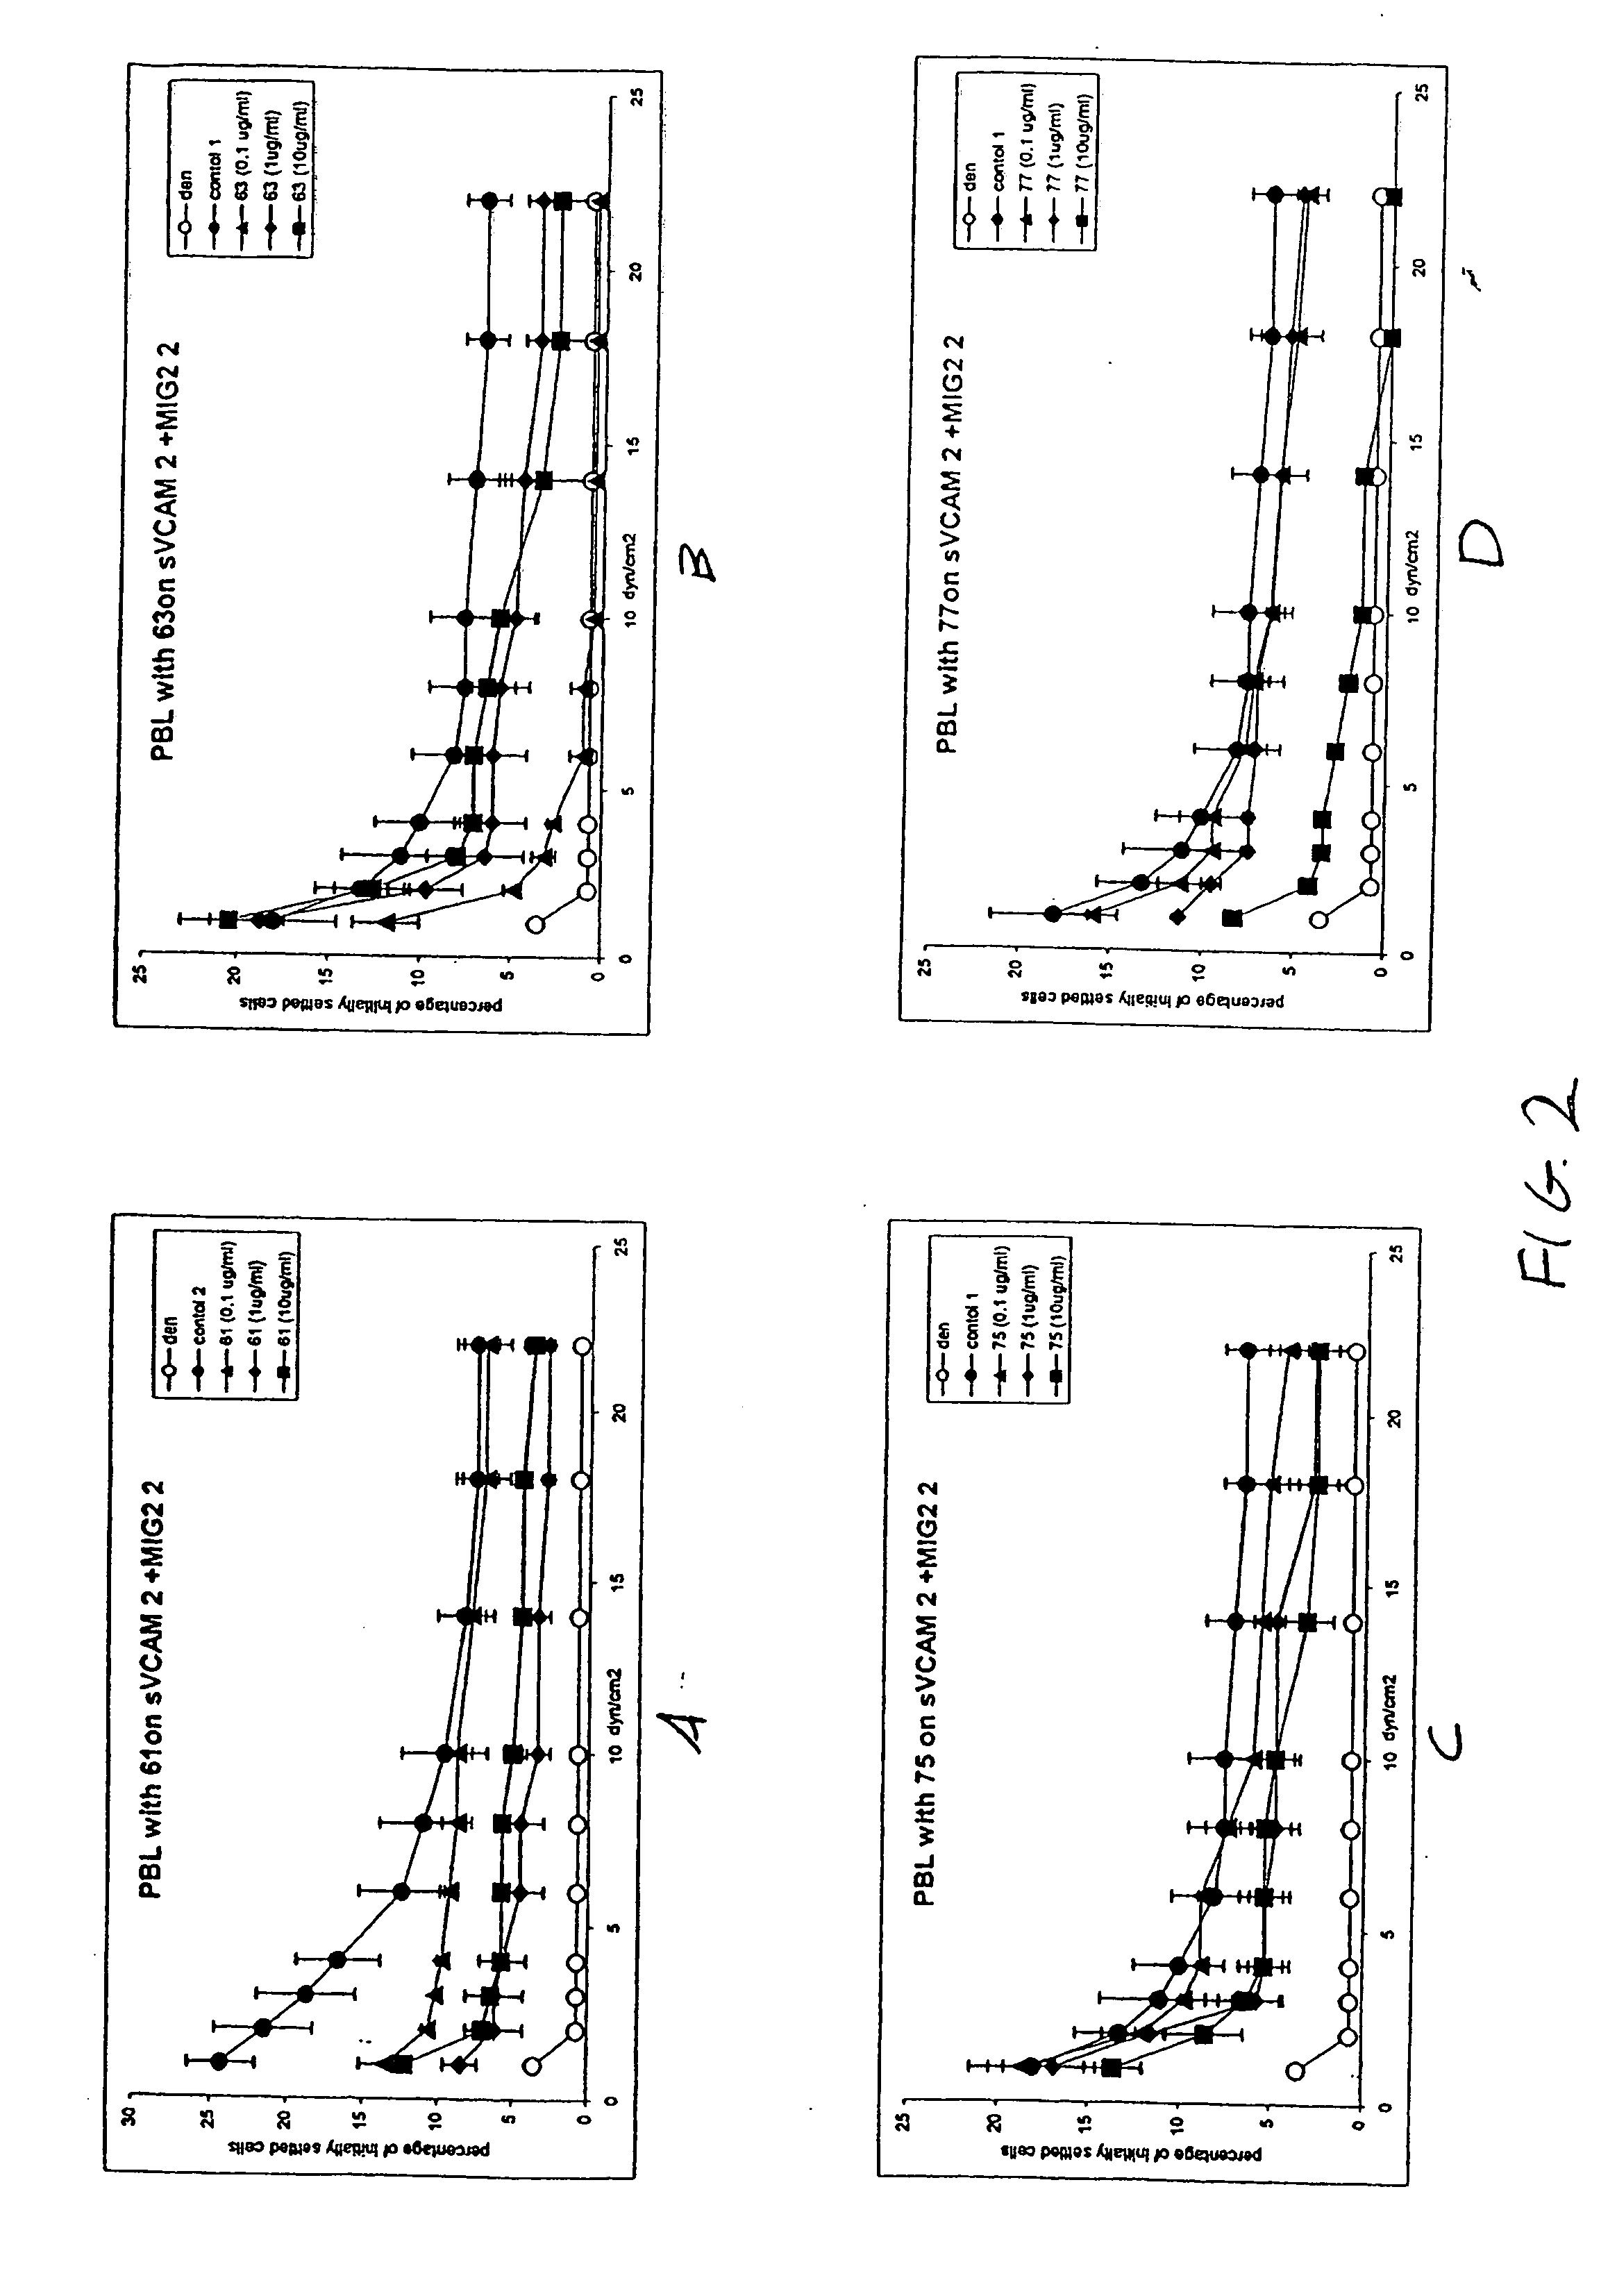 Compounds for use in the treatment of aids and other viral diseases and HIV-related infections and compositions containing such compounds, methods of treating such diseases and infections and methods of making such compounds and compositions